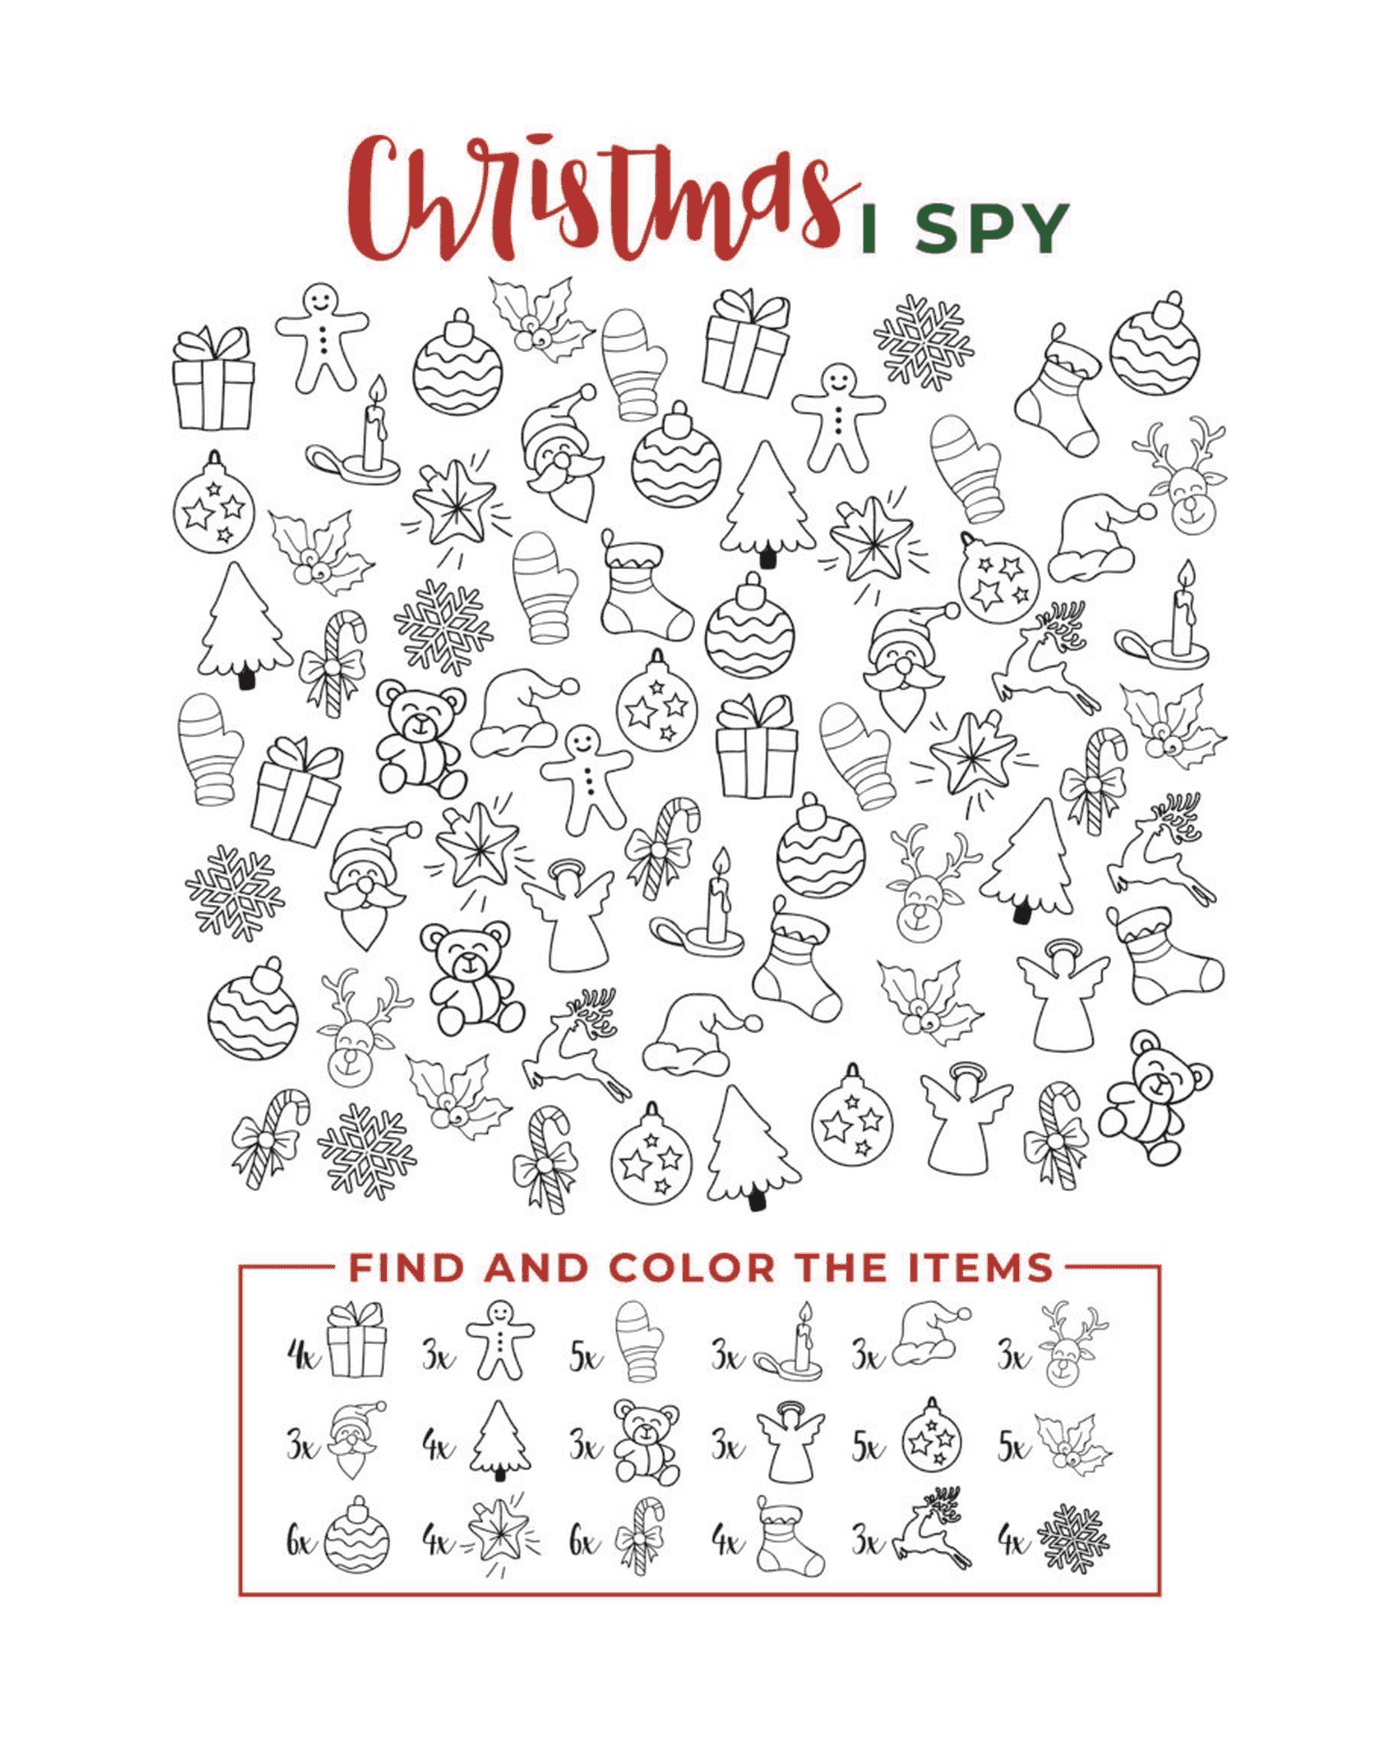  I Spy Christmas Find and color the items 